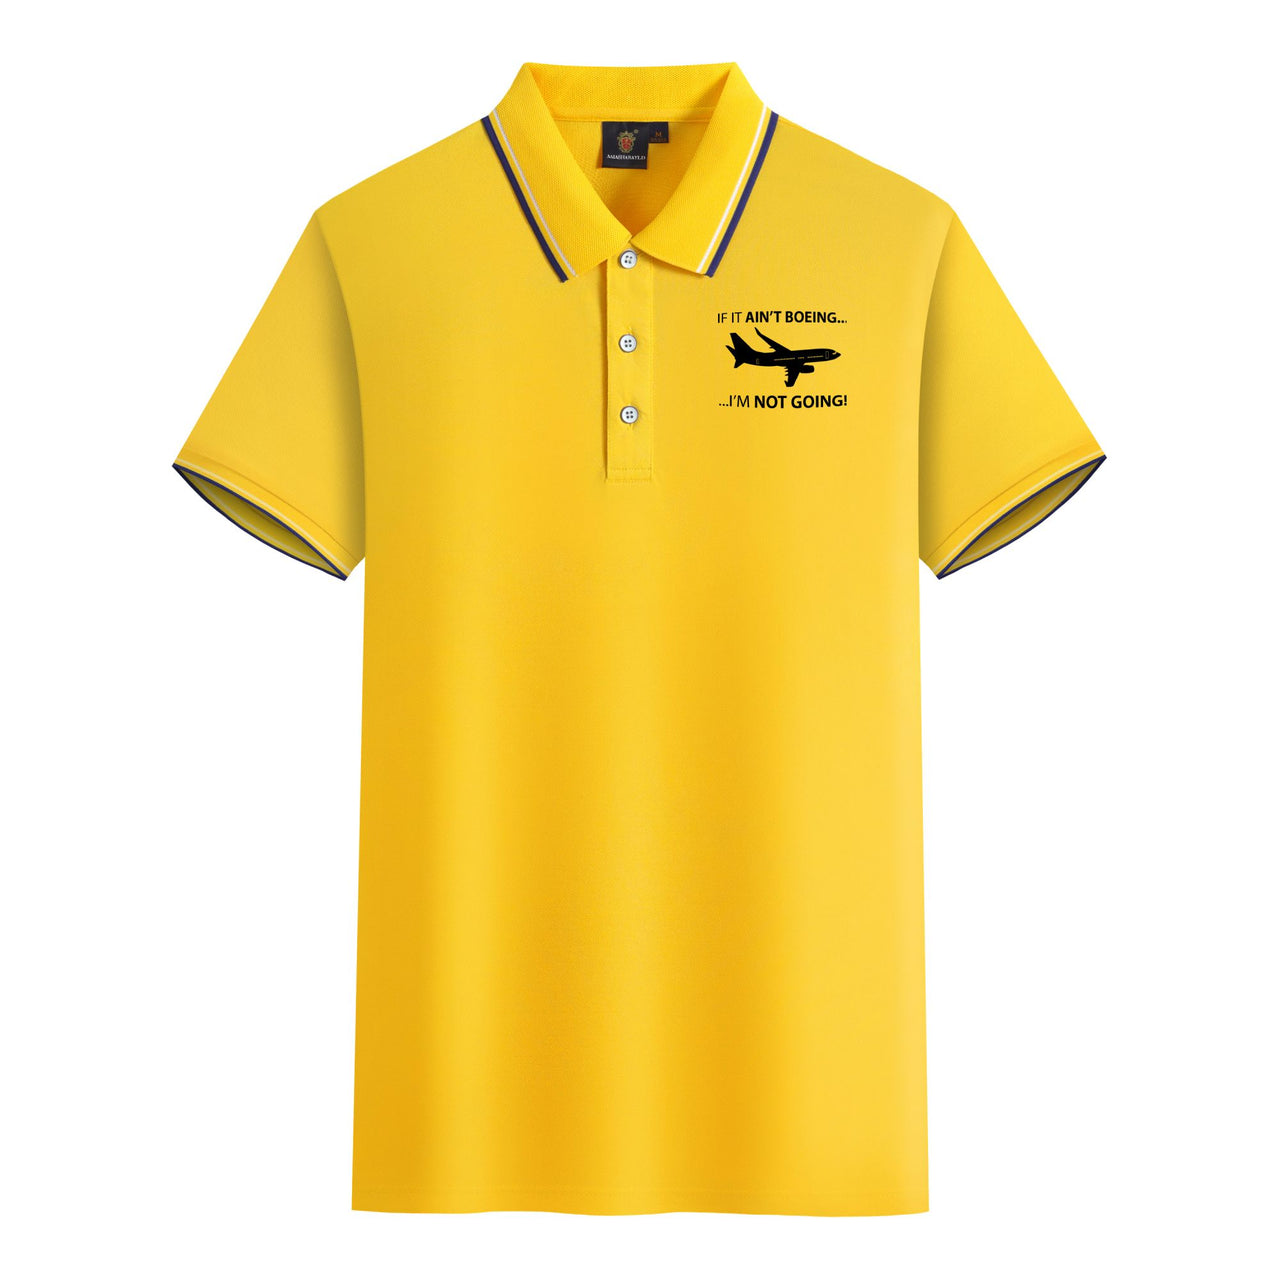 If It Ain't Boeing I'm Not Going! Designed Stylish Polo T-Shirts